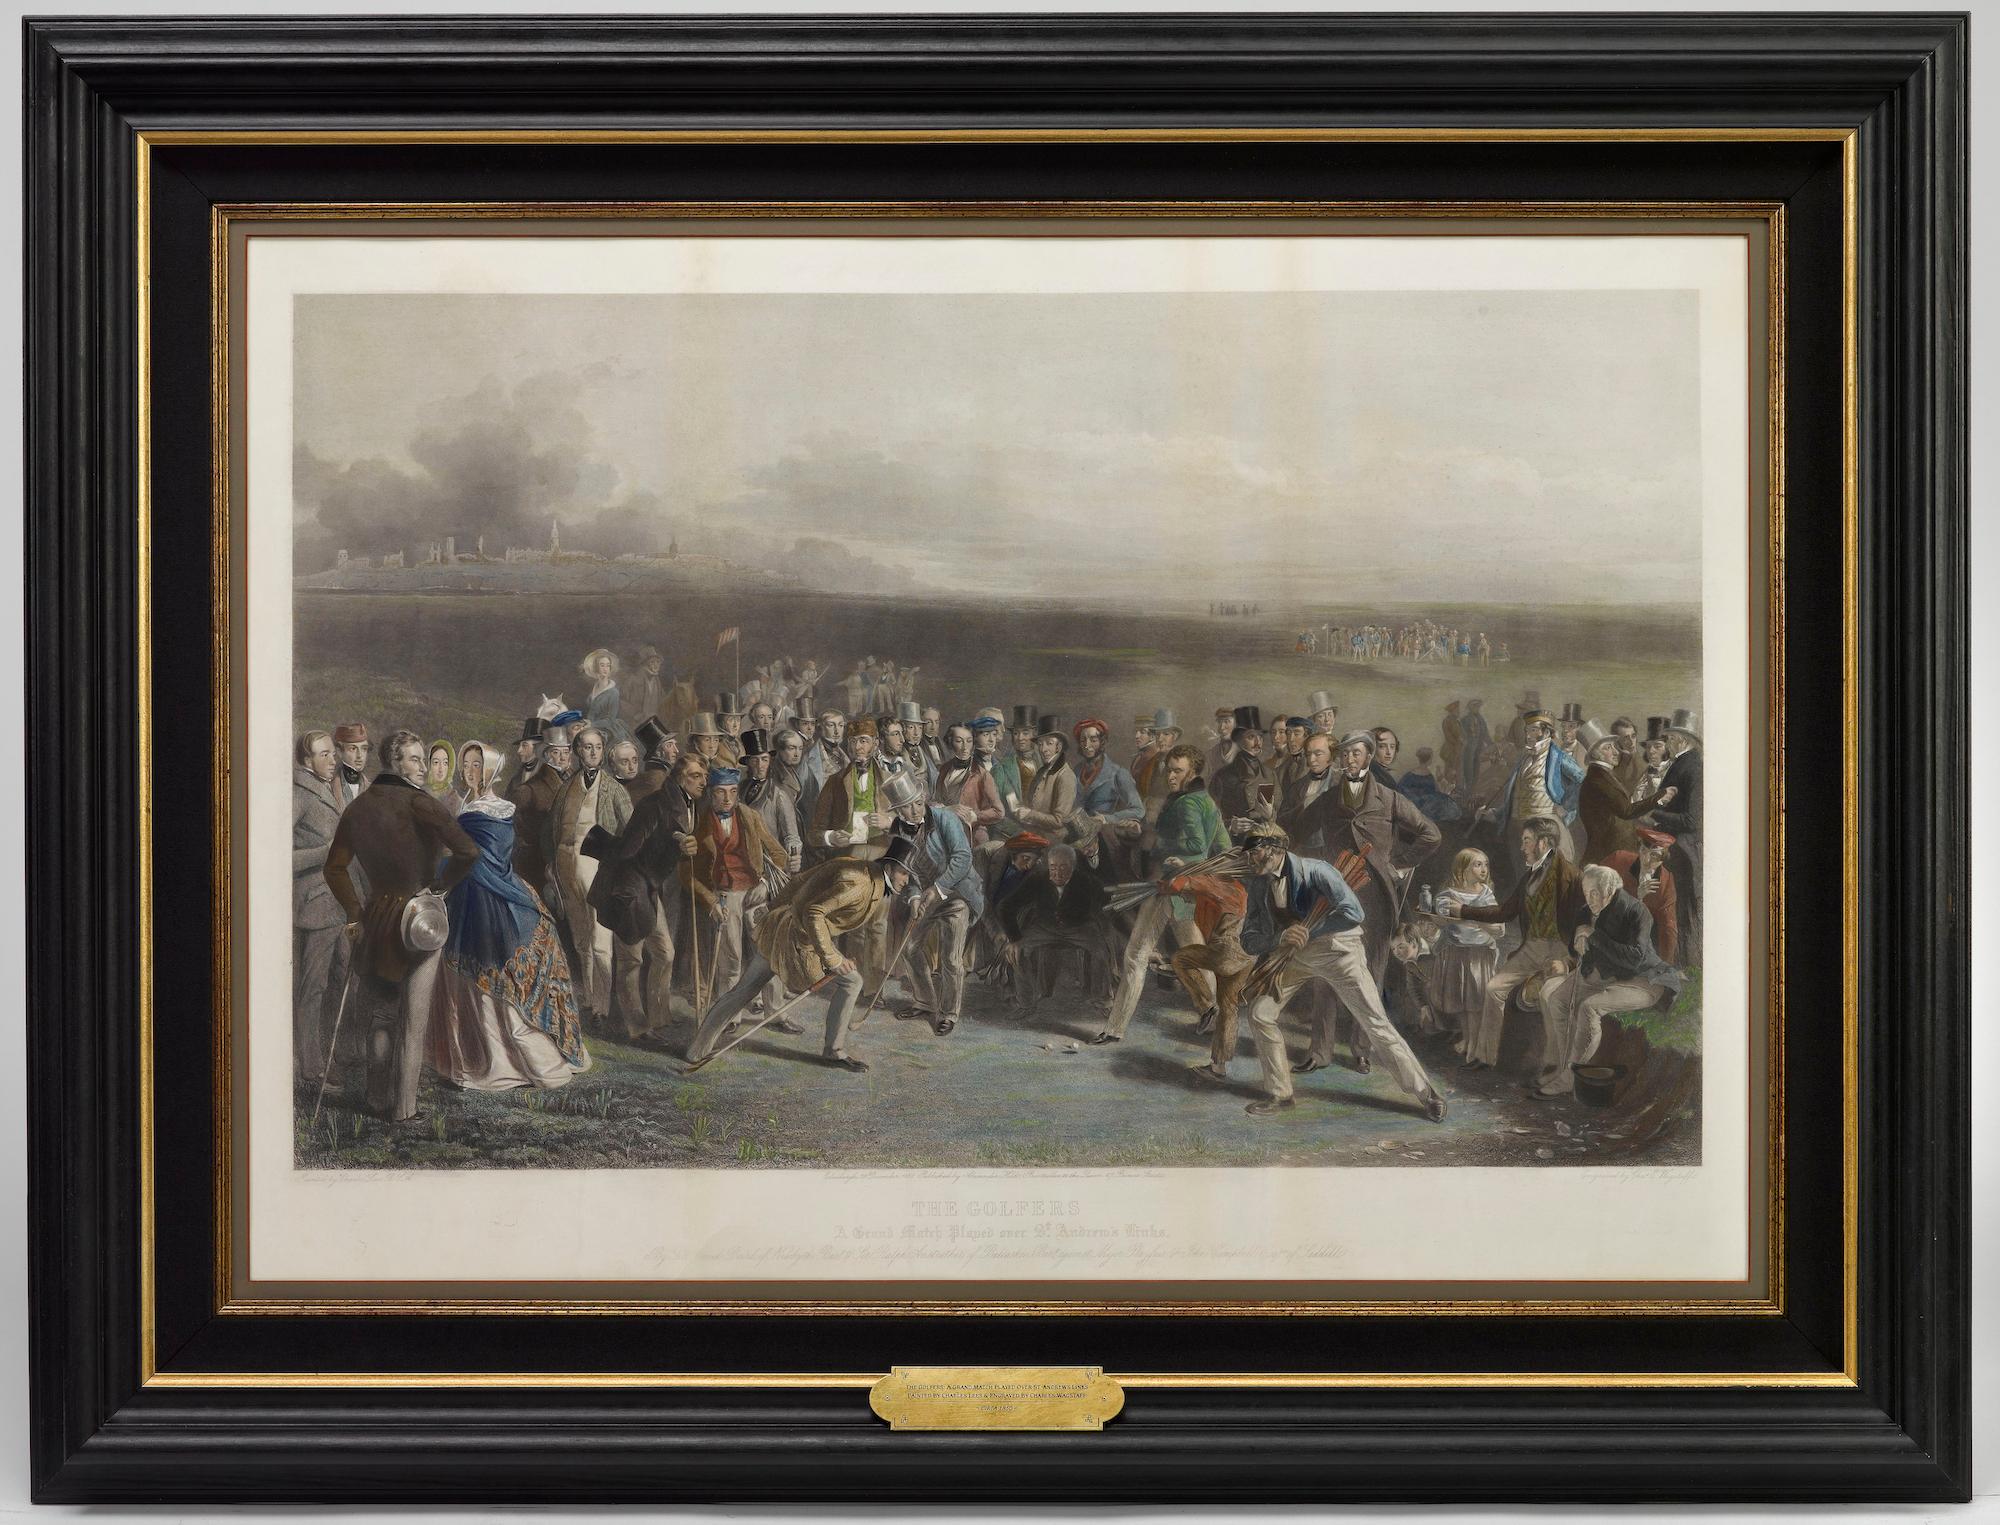 Presented is The Golfers: A Grant Match Played Over the St. Andrews, a hand-colored engraving by Charles E. Wagstaff, after the original oil painting by Charles Lees. 

This engraving is of one of the most famous golfing paintings of all time, set